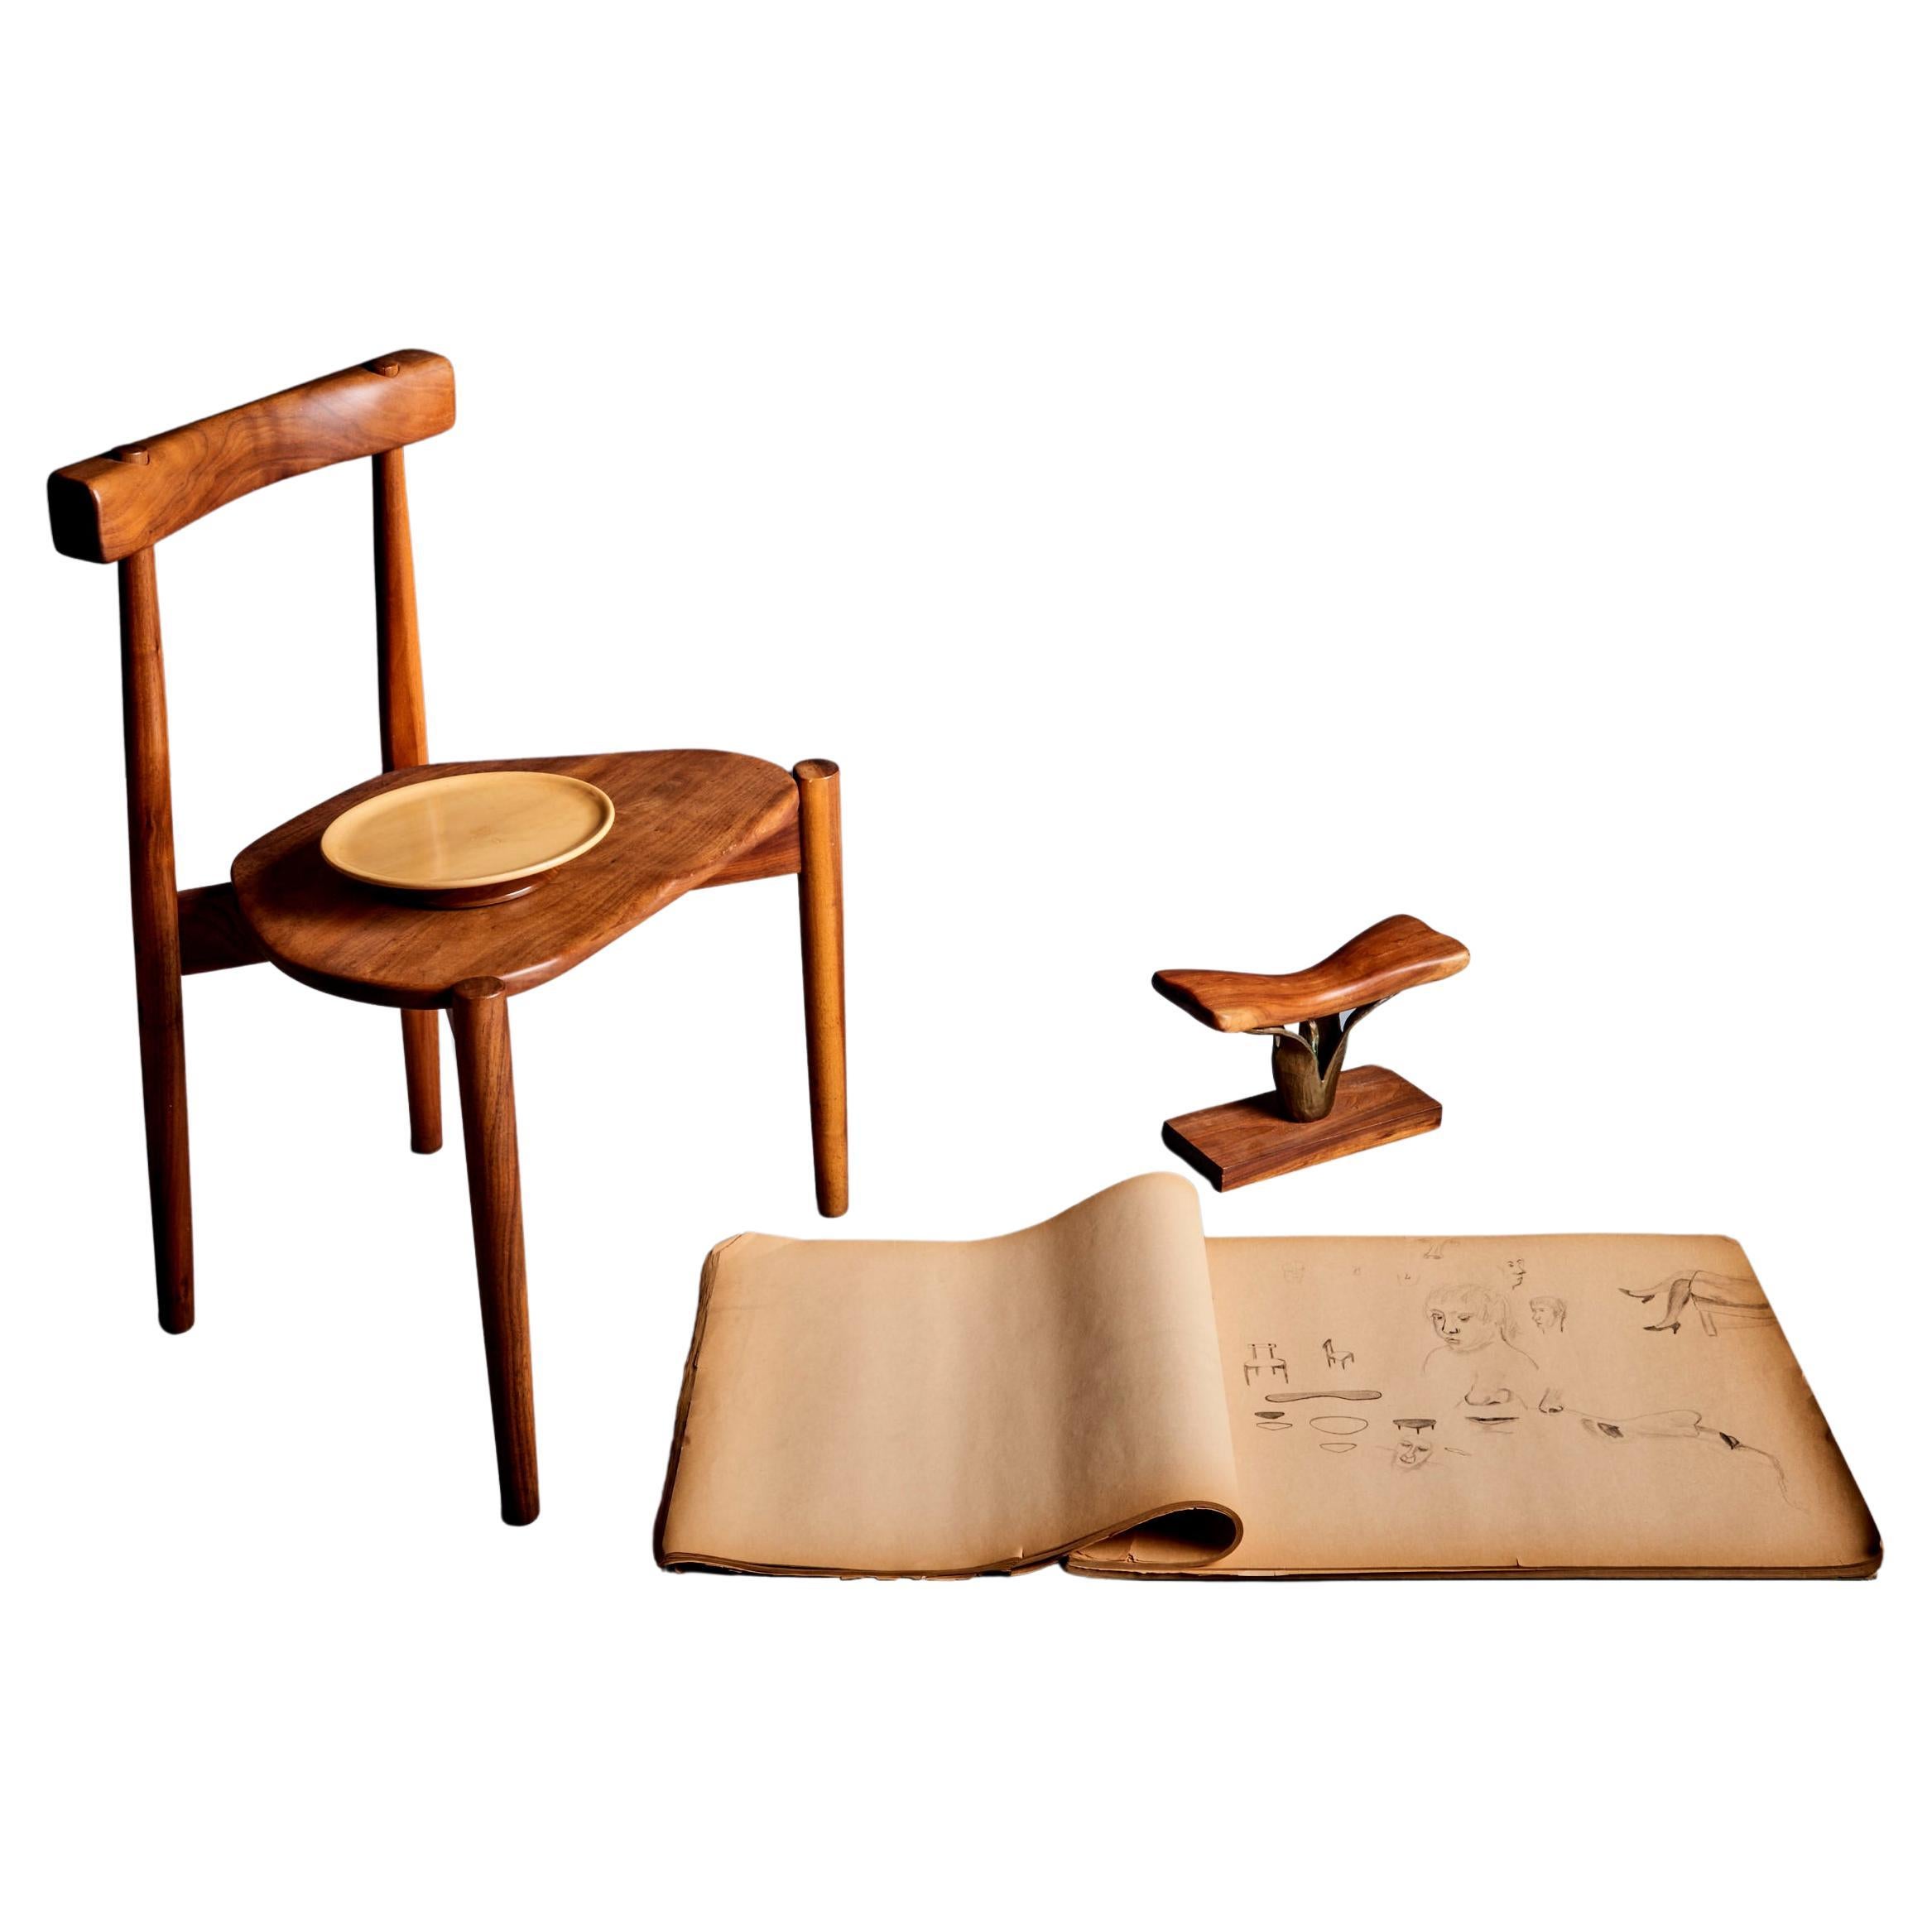 Clarence Teed Collection of a Chair, one Platter a Sculpture and a Sketch Book For Sale